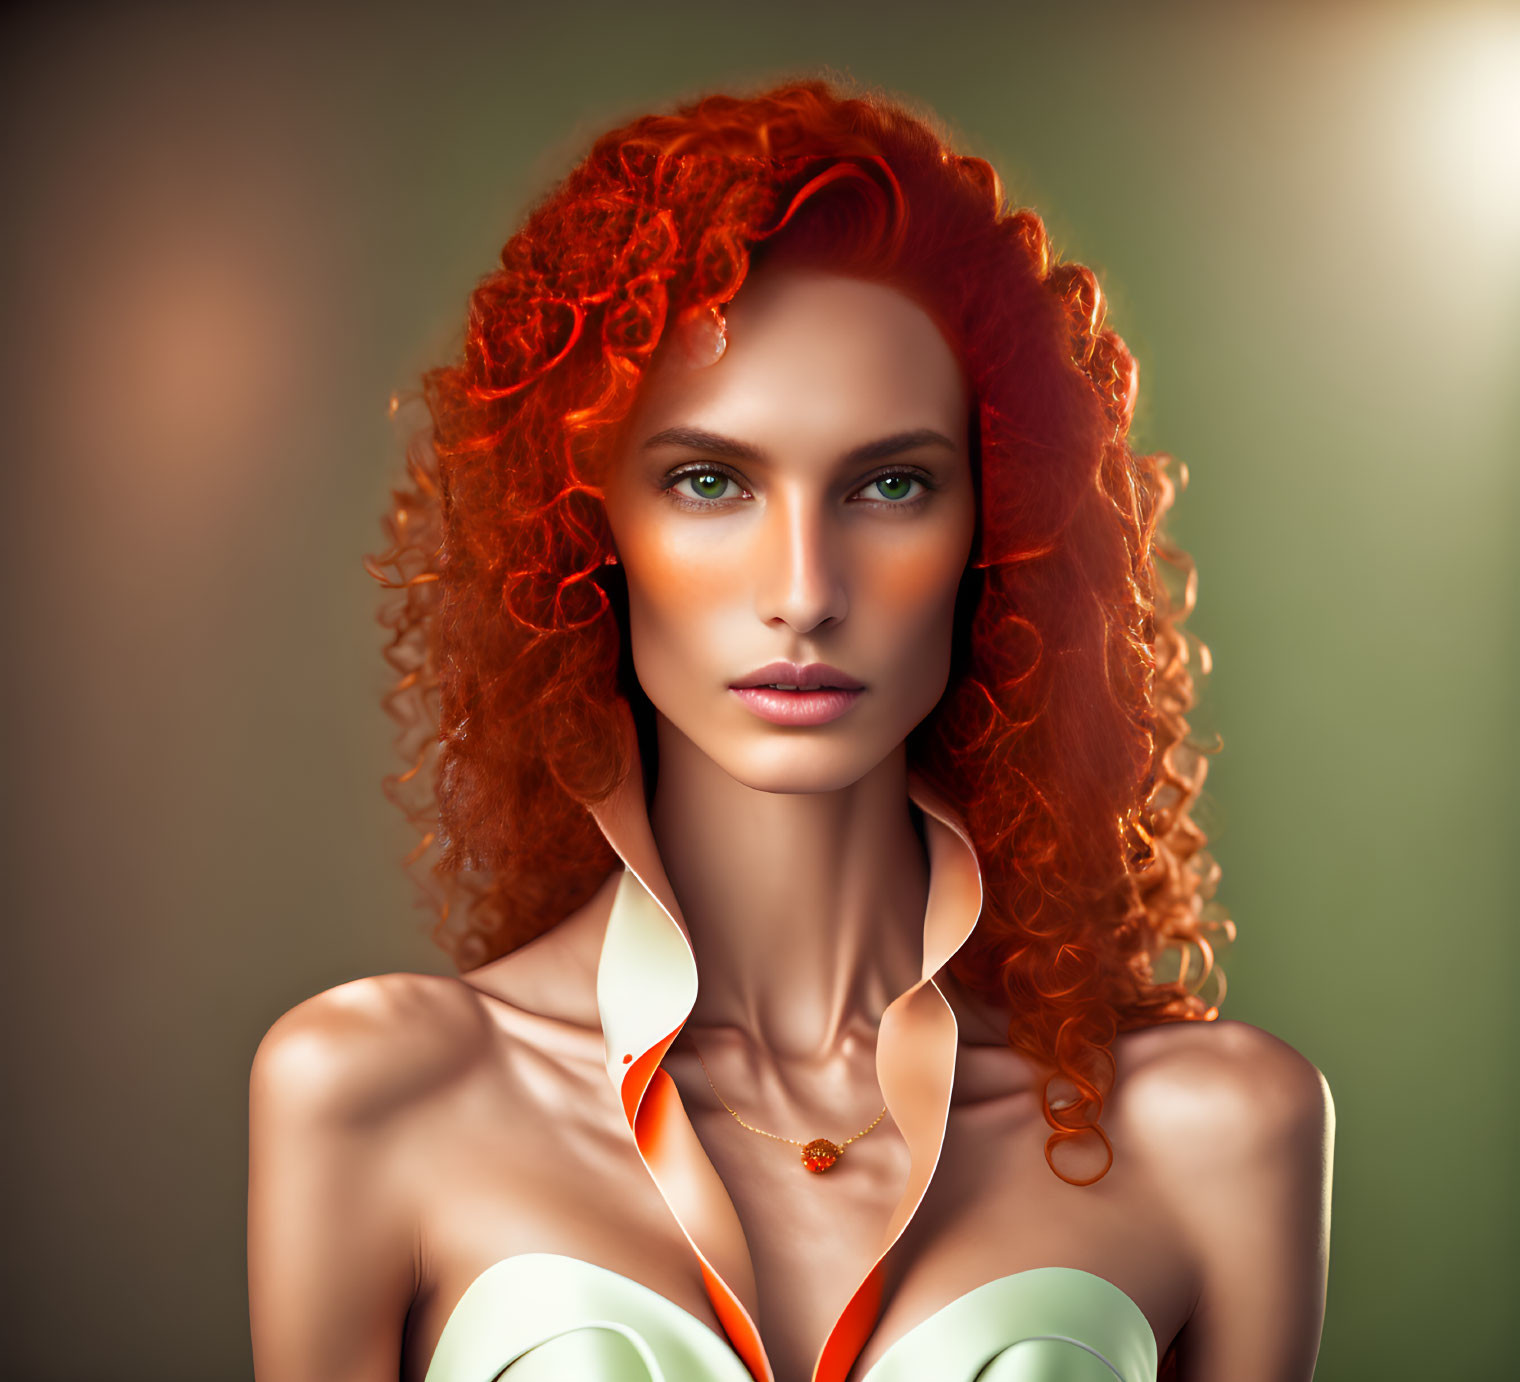 Digital Artwork: Woman with Curly Red Hair in White Dress